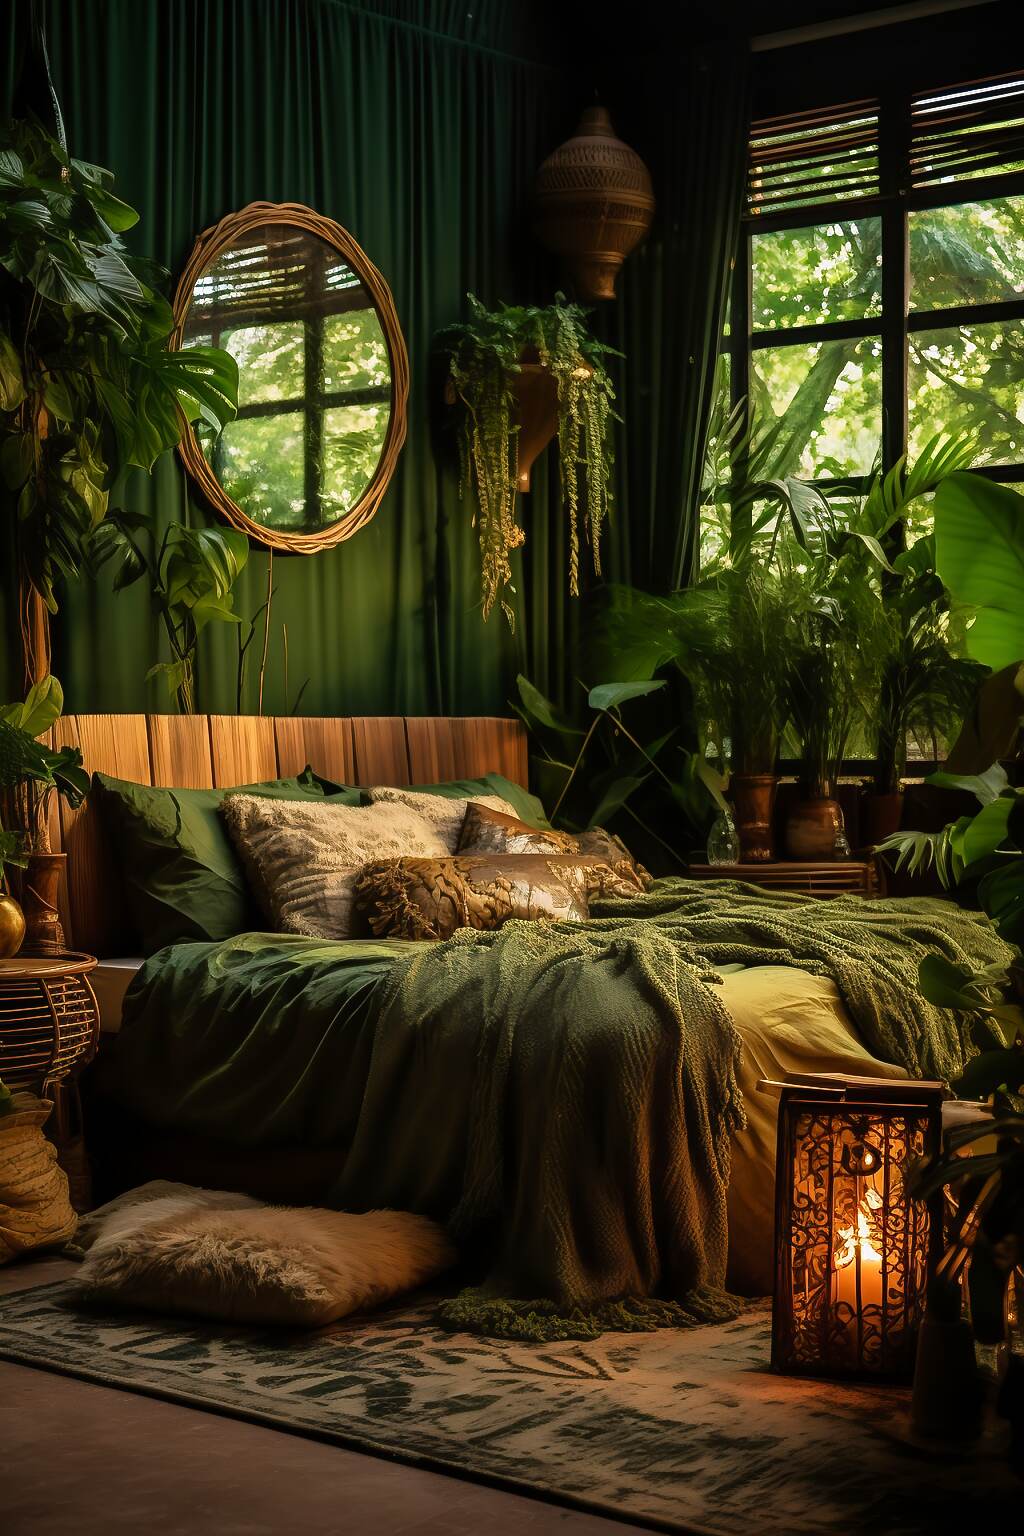 Compact Dark Boho Bedroom With A Green &Amp; Brown Color Scheme, Featuring Tropical Plants, Bamboo Furniture, And Jungle Murals, Creating An Invigorating And Vibrant Atmosphere.